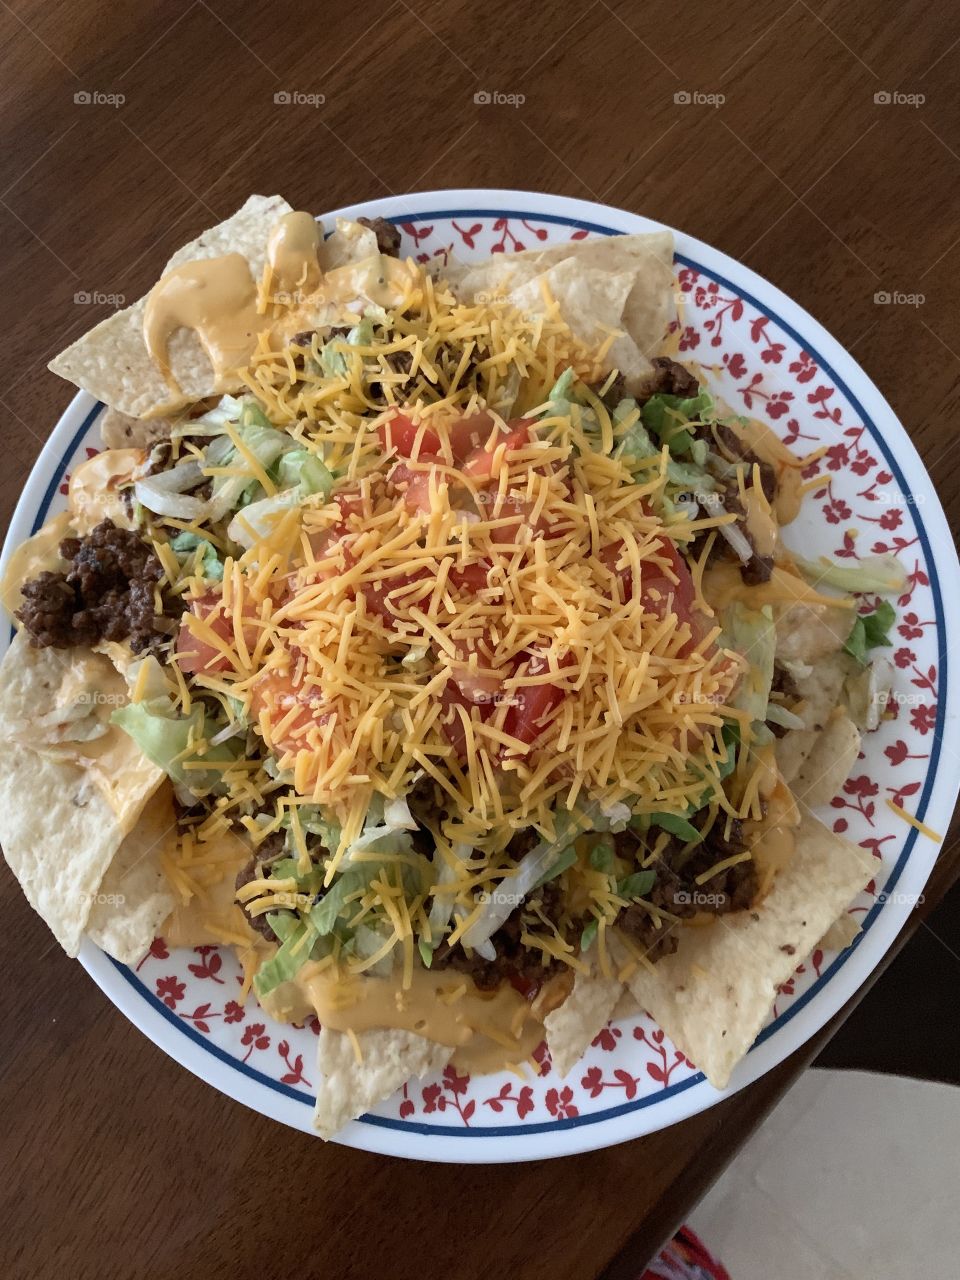 Homemade Nachos Yum Yum! #tasty #mexican #mexicanfood #loaded #beef #fresh #cheese #cheesy #layered #delicious #nachocheese #dicedtomato #lettuce